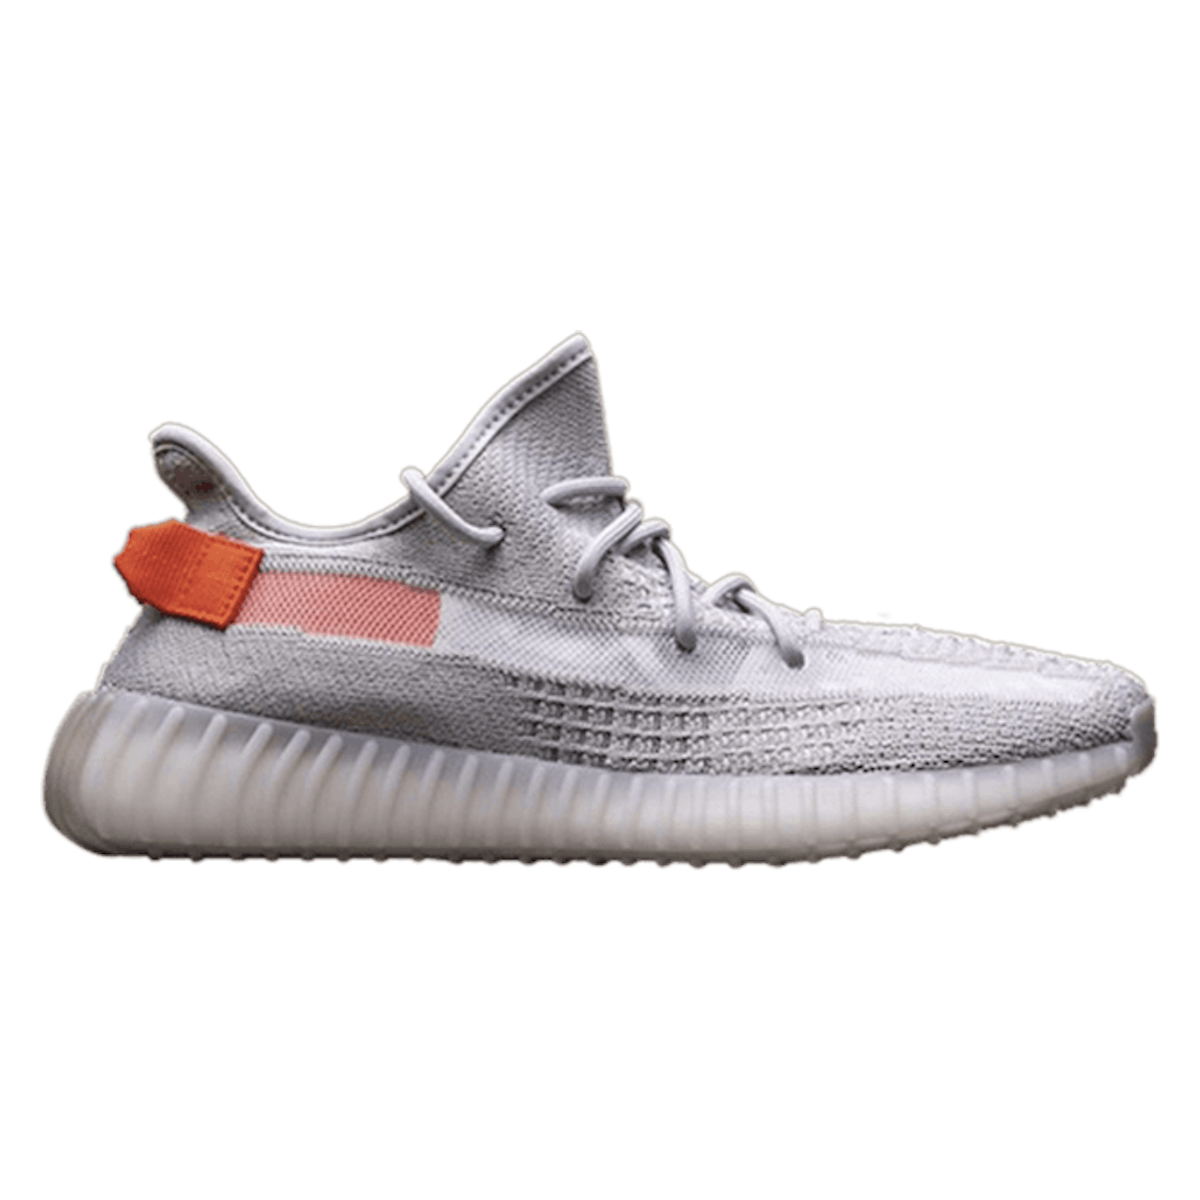 Adidas Yeezy Boost 350 V2 "Taillight"